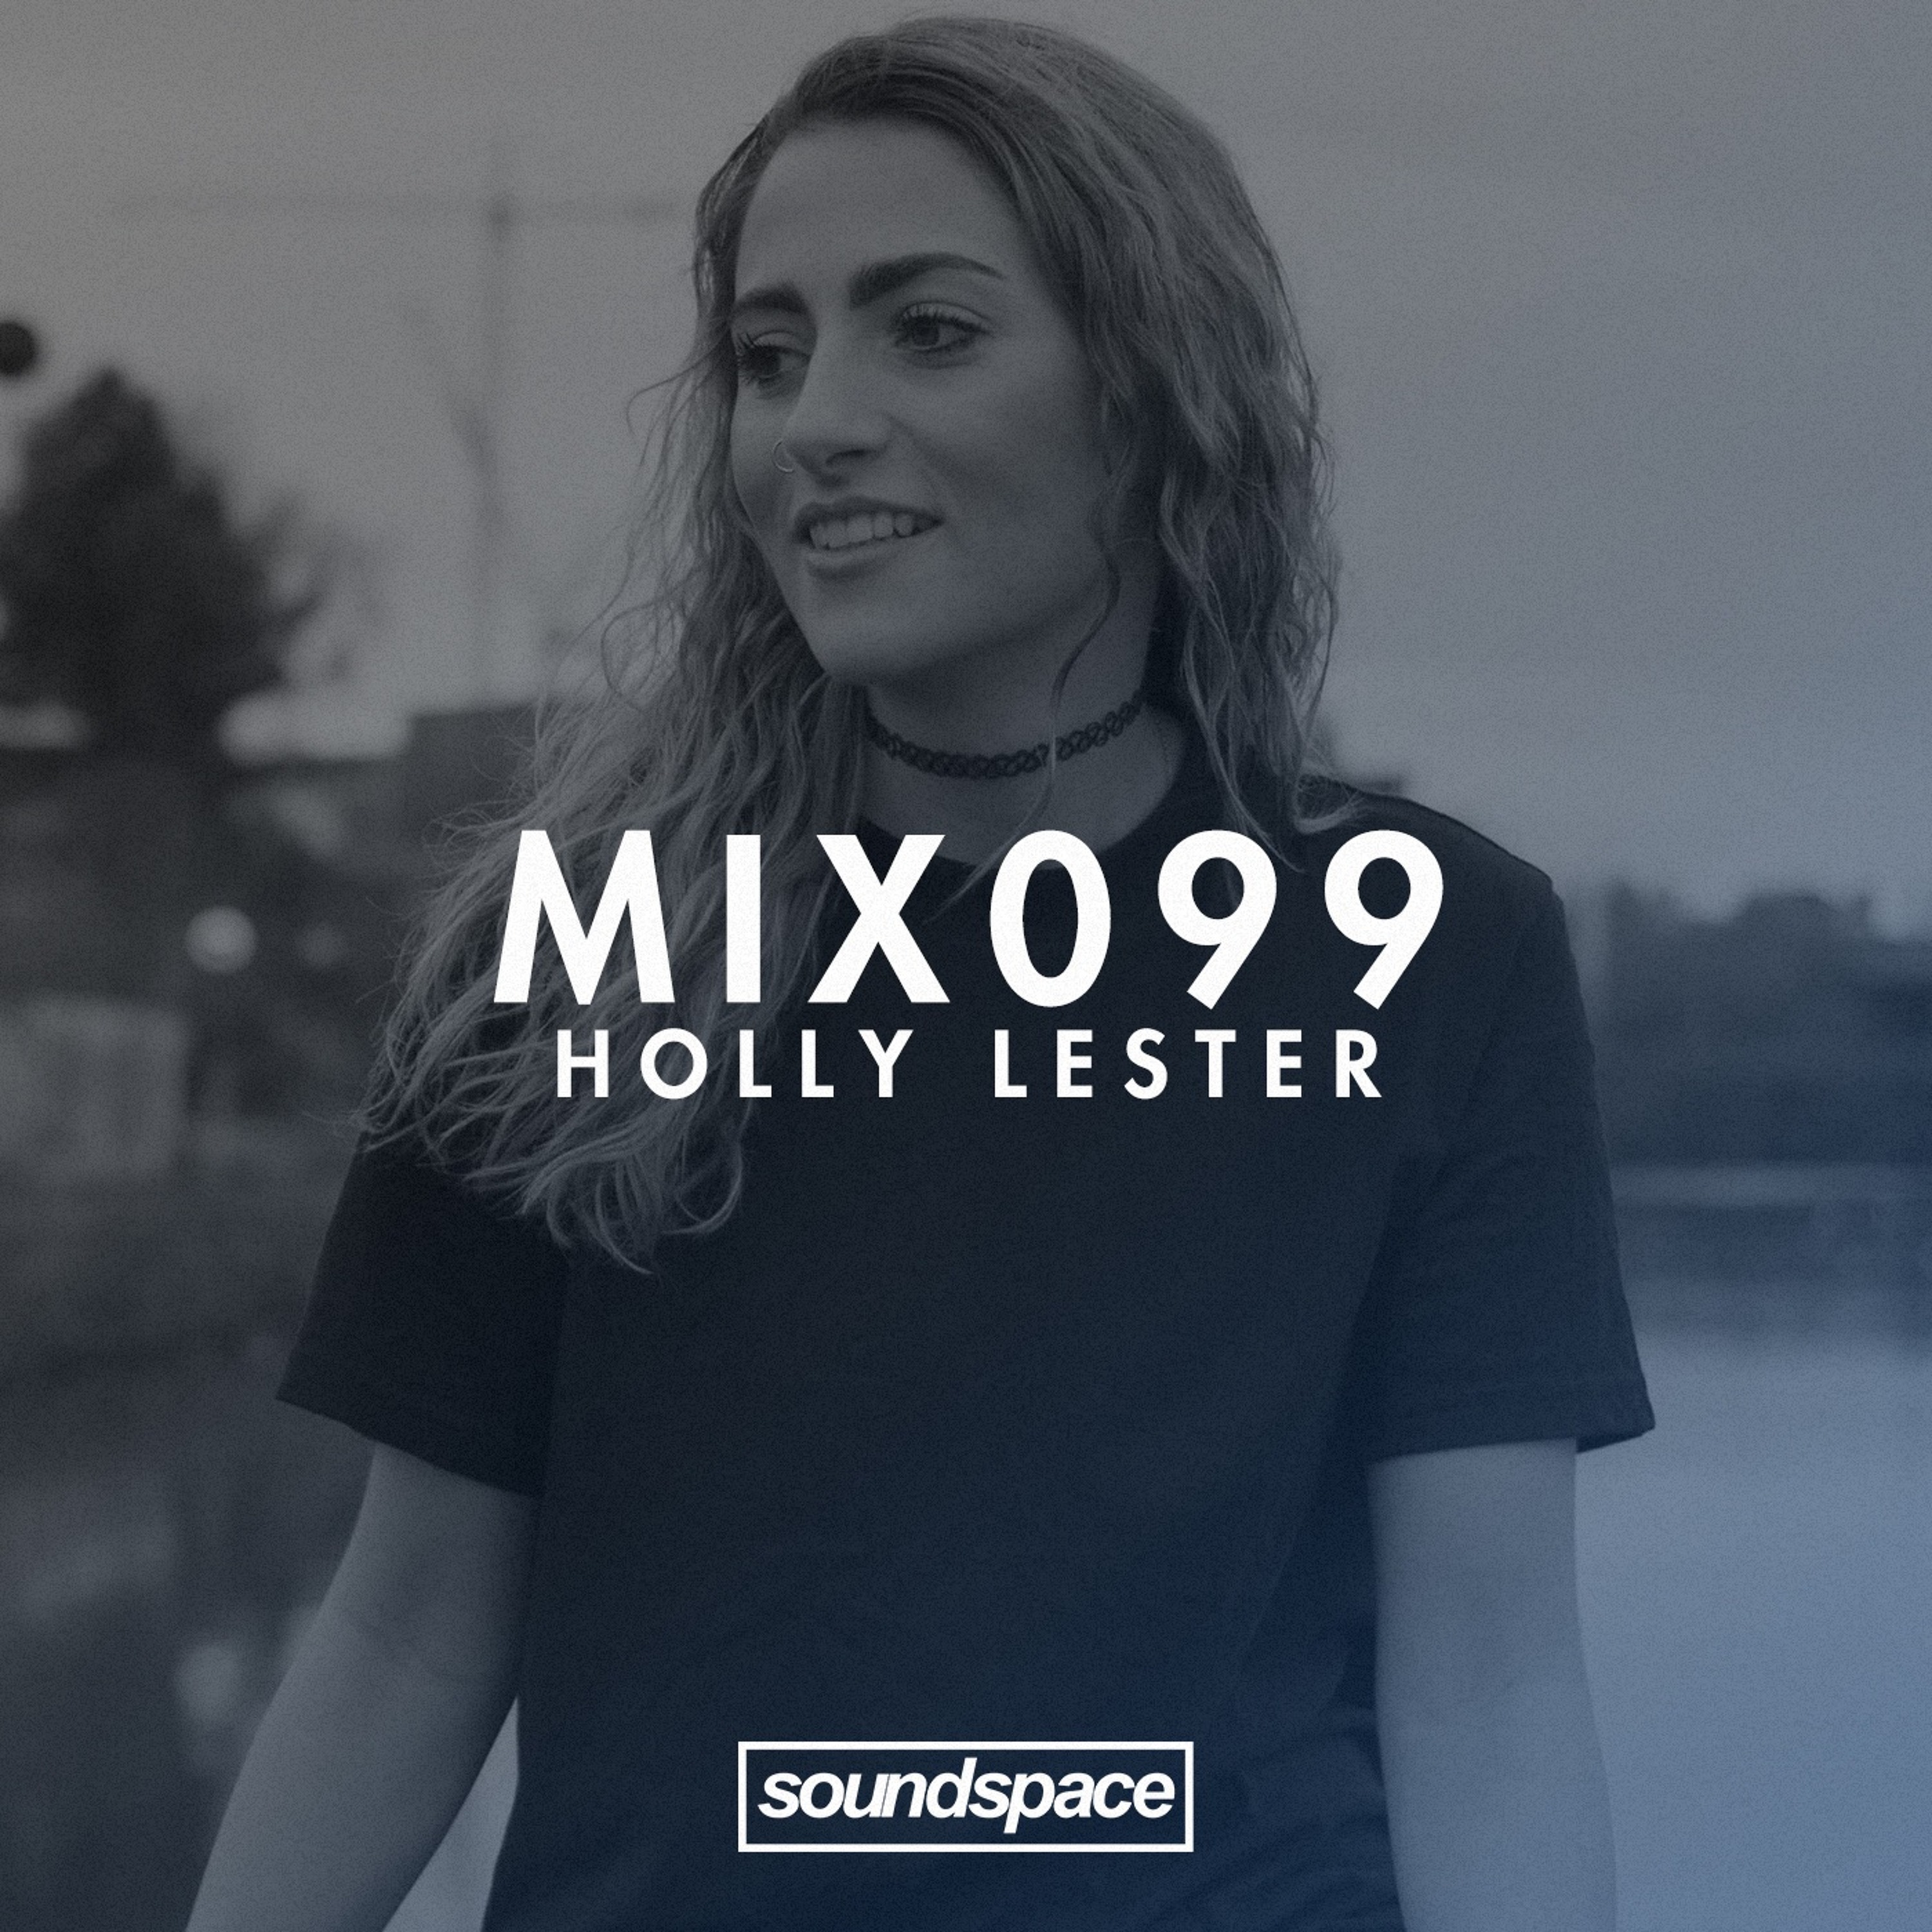 MIX099 - Holly Lester